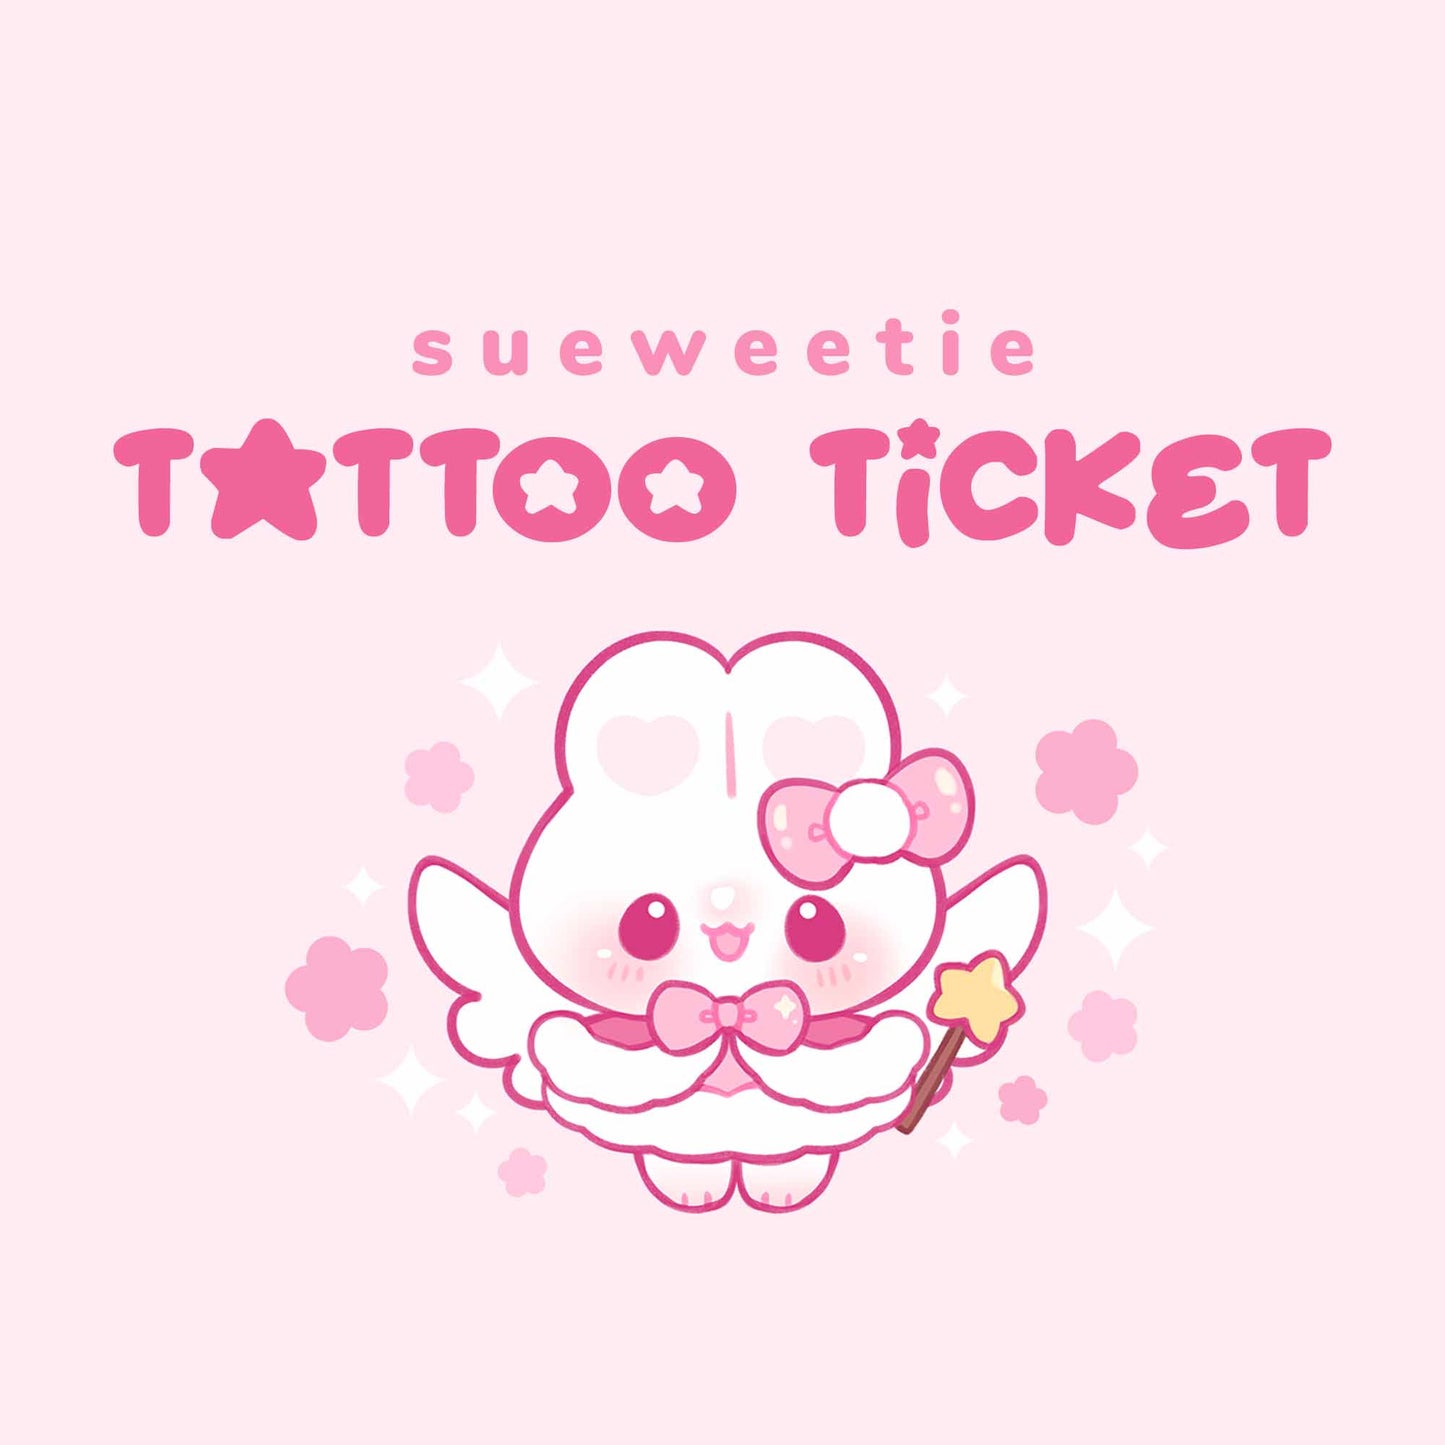 Tattoo Ticket (Read before purchasing!)